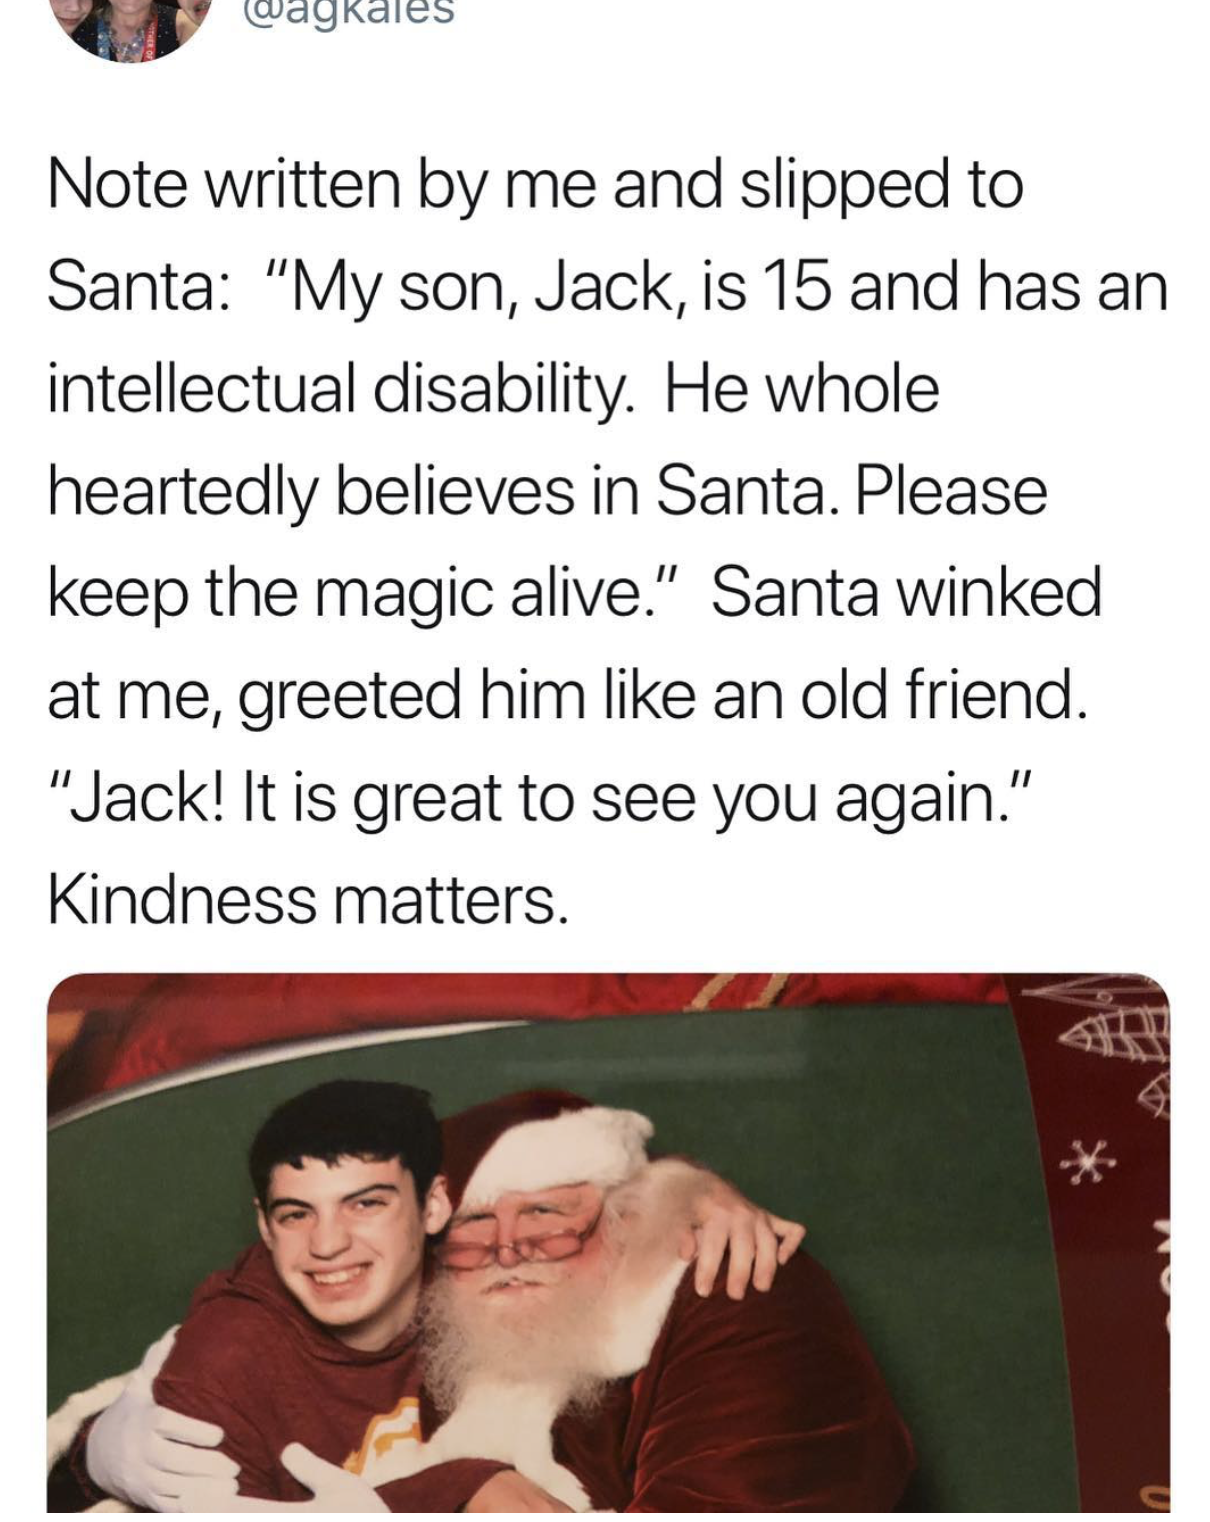 intellectual disability memes - Waykales Note written by me and slipped to Santa "My son, Jack, is 15 and has an intellectual disability. He whole heartedly believes in Santa. Please keep the magic alive." Santa winked at me, greeted him an old friend. "J